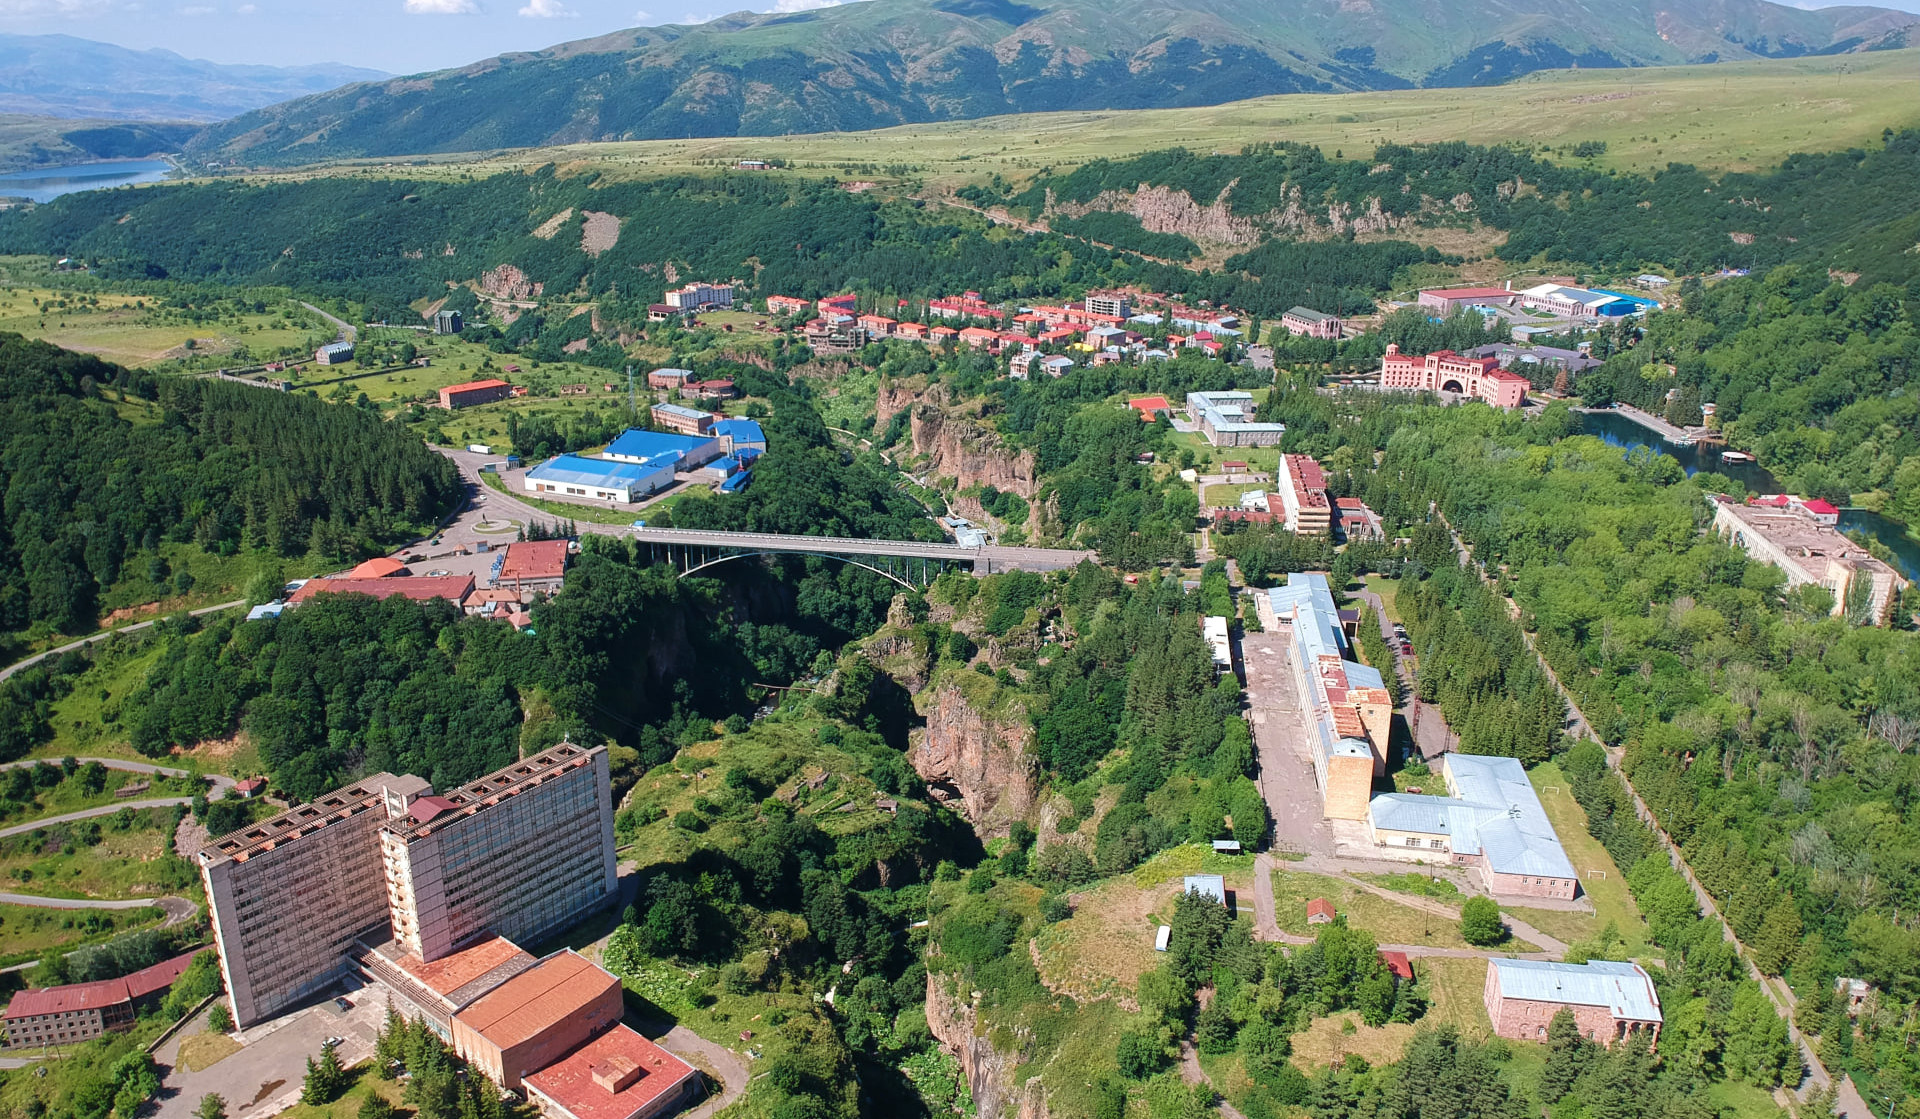 Jermuk’s hotels are open again